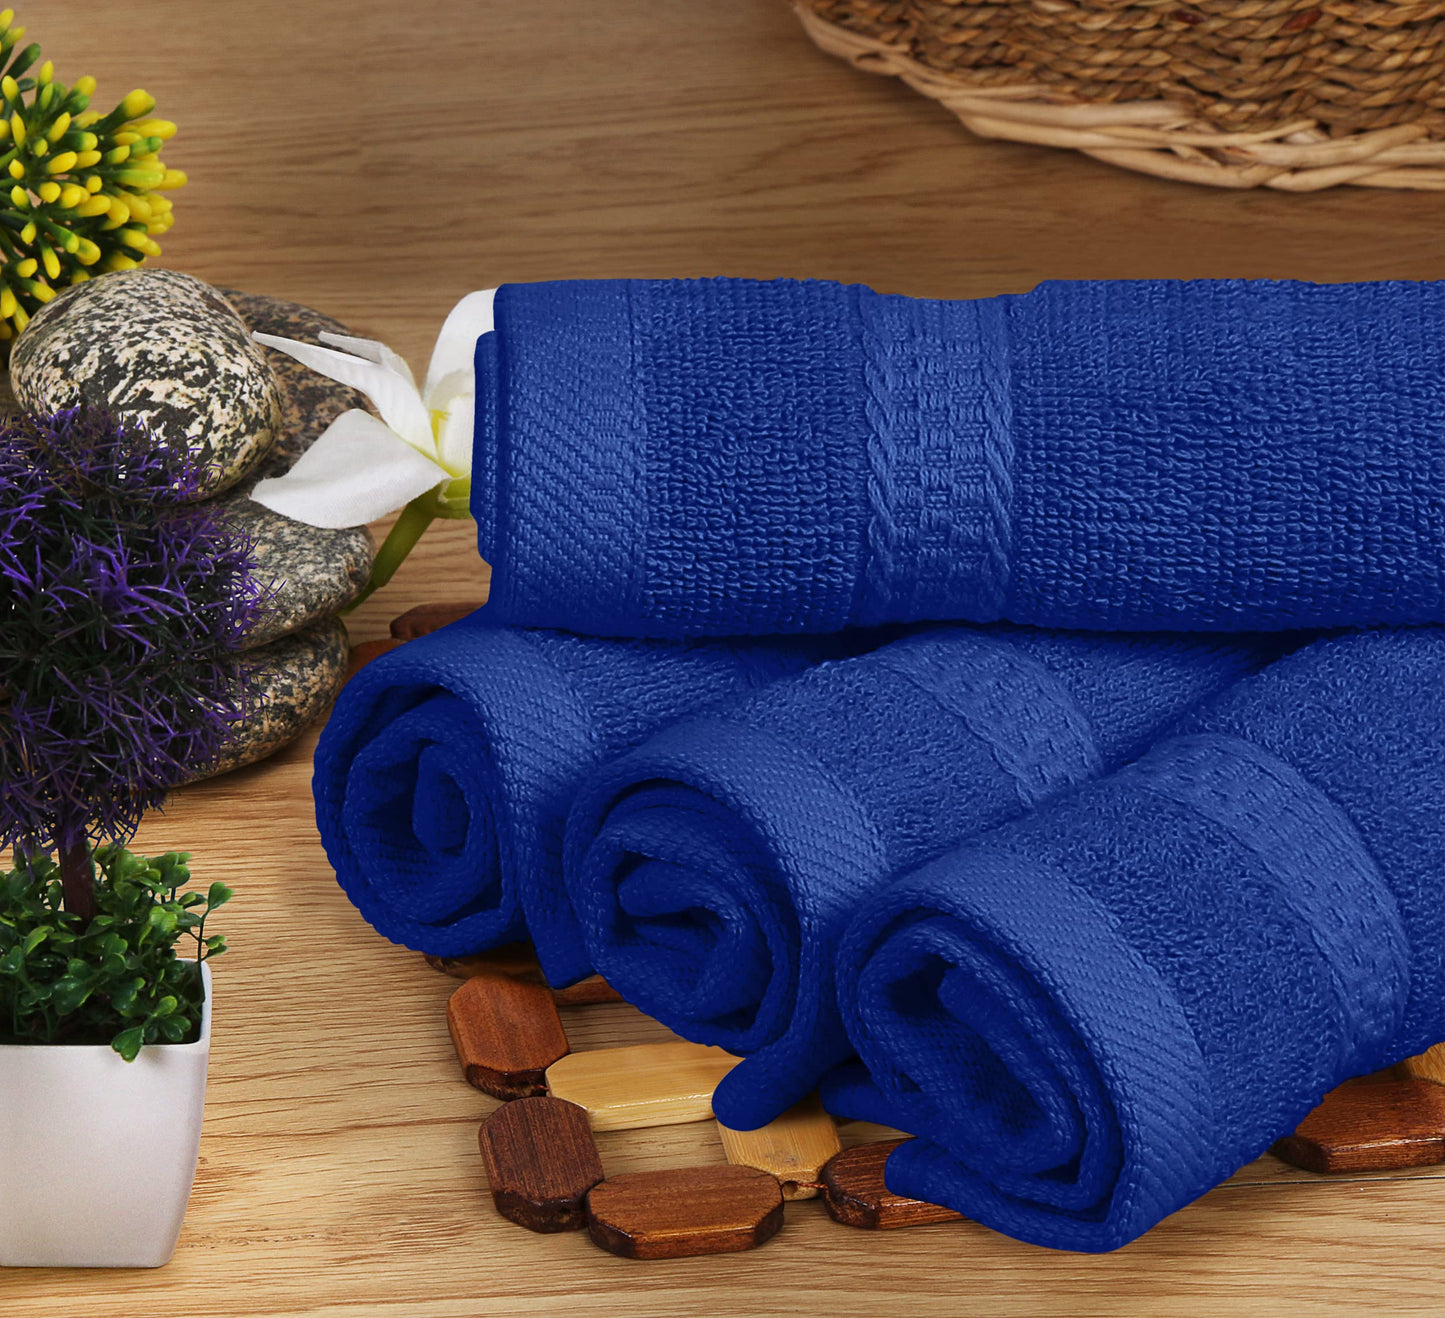 Utopia Towels 8-Piece Premium Towel Set, 2 Bath Towels, 2 Hand Towels, and 4 Wash Cloths, 600 GSM 100% Ring Spun Cotton Highly Absorbent Towels for Bathroom, Gym, Hotel, and Spa (Royal Blue)